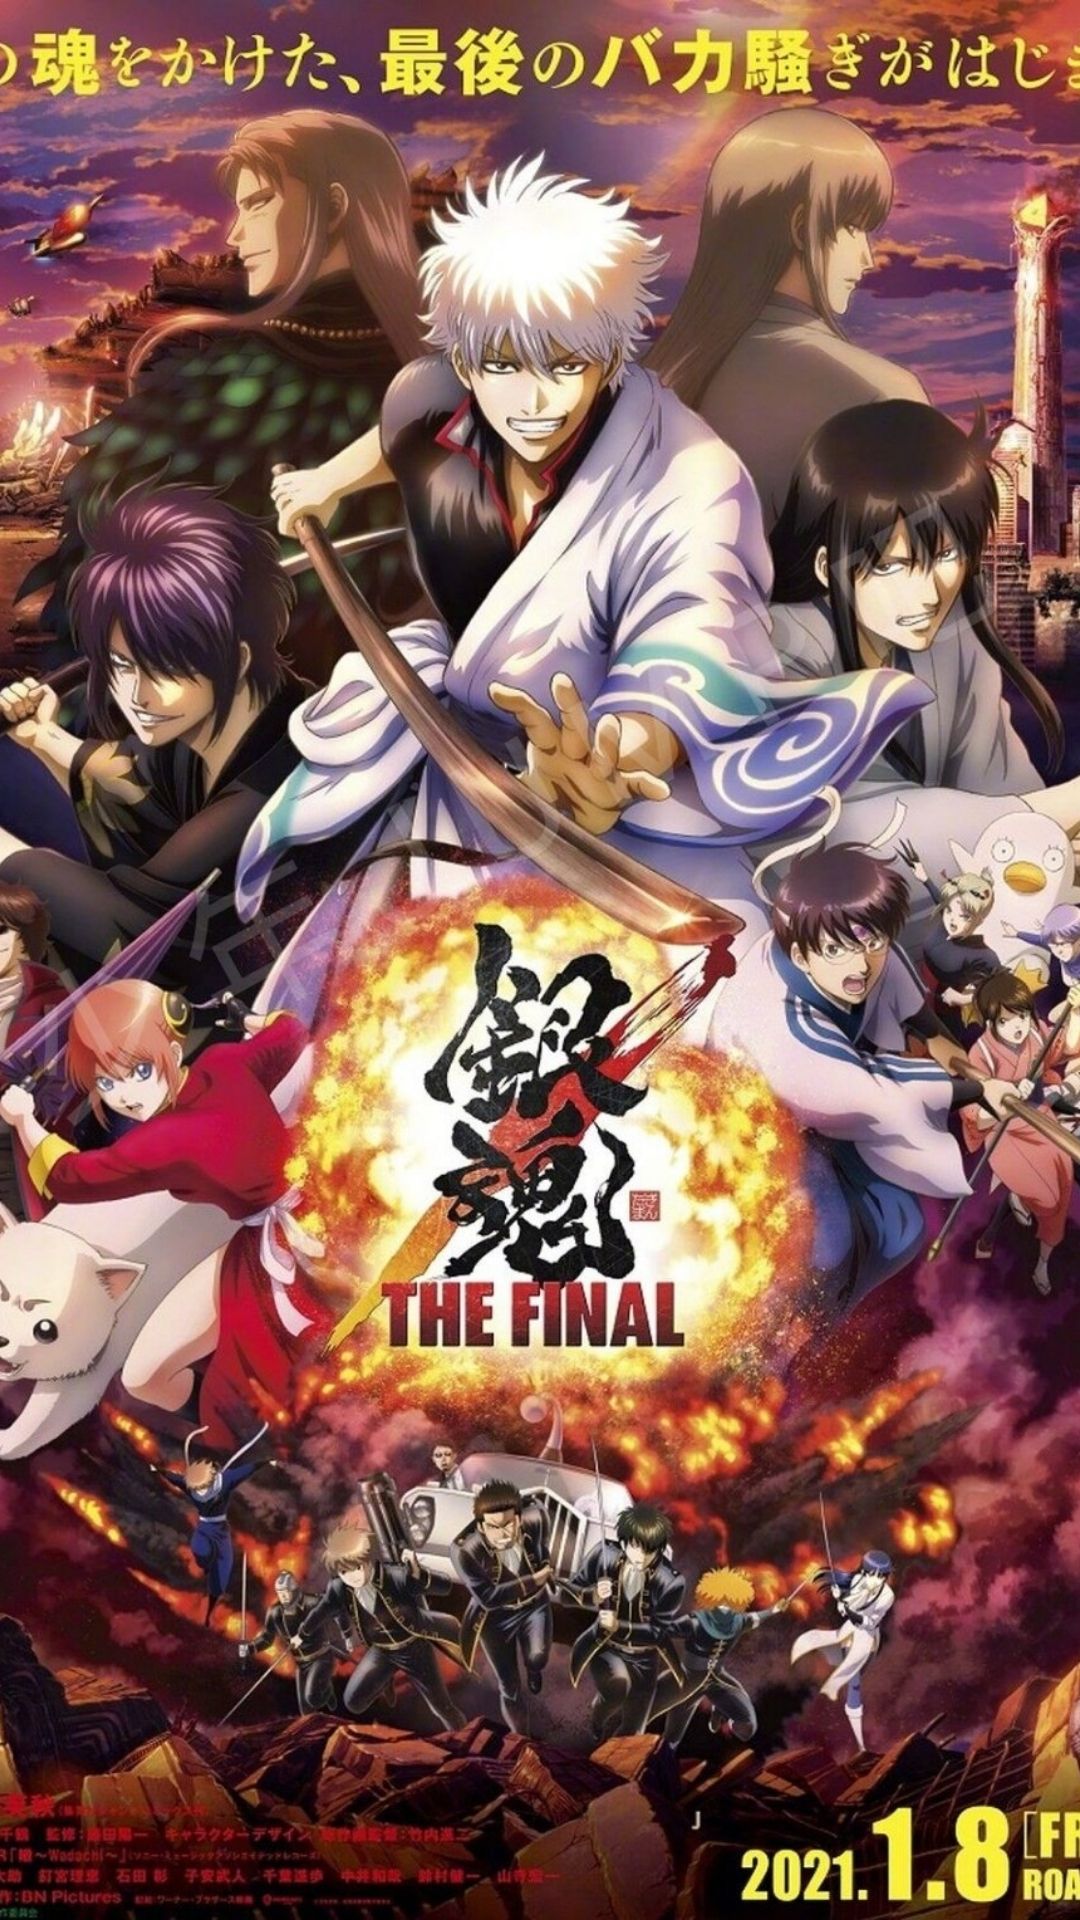 Gintama: The Final Movie Inspires New Novel In January 2021 